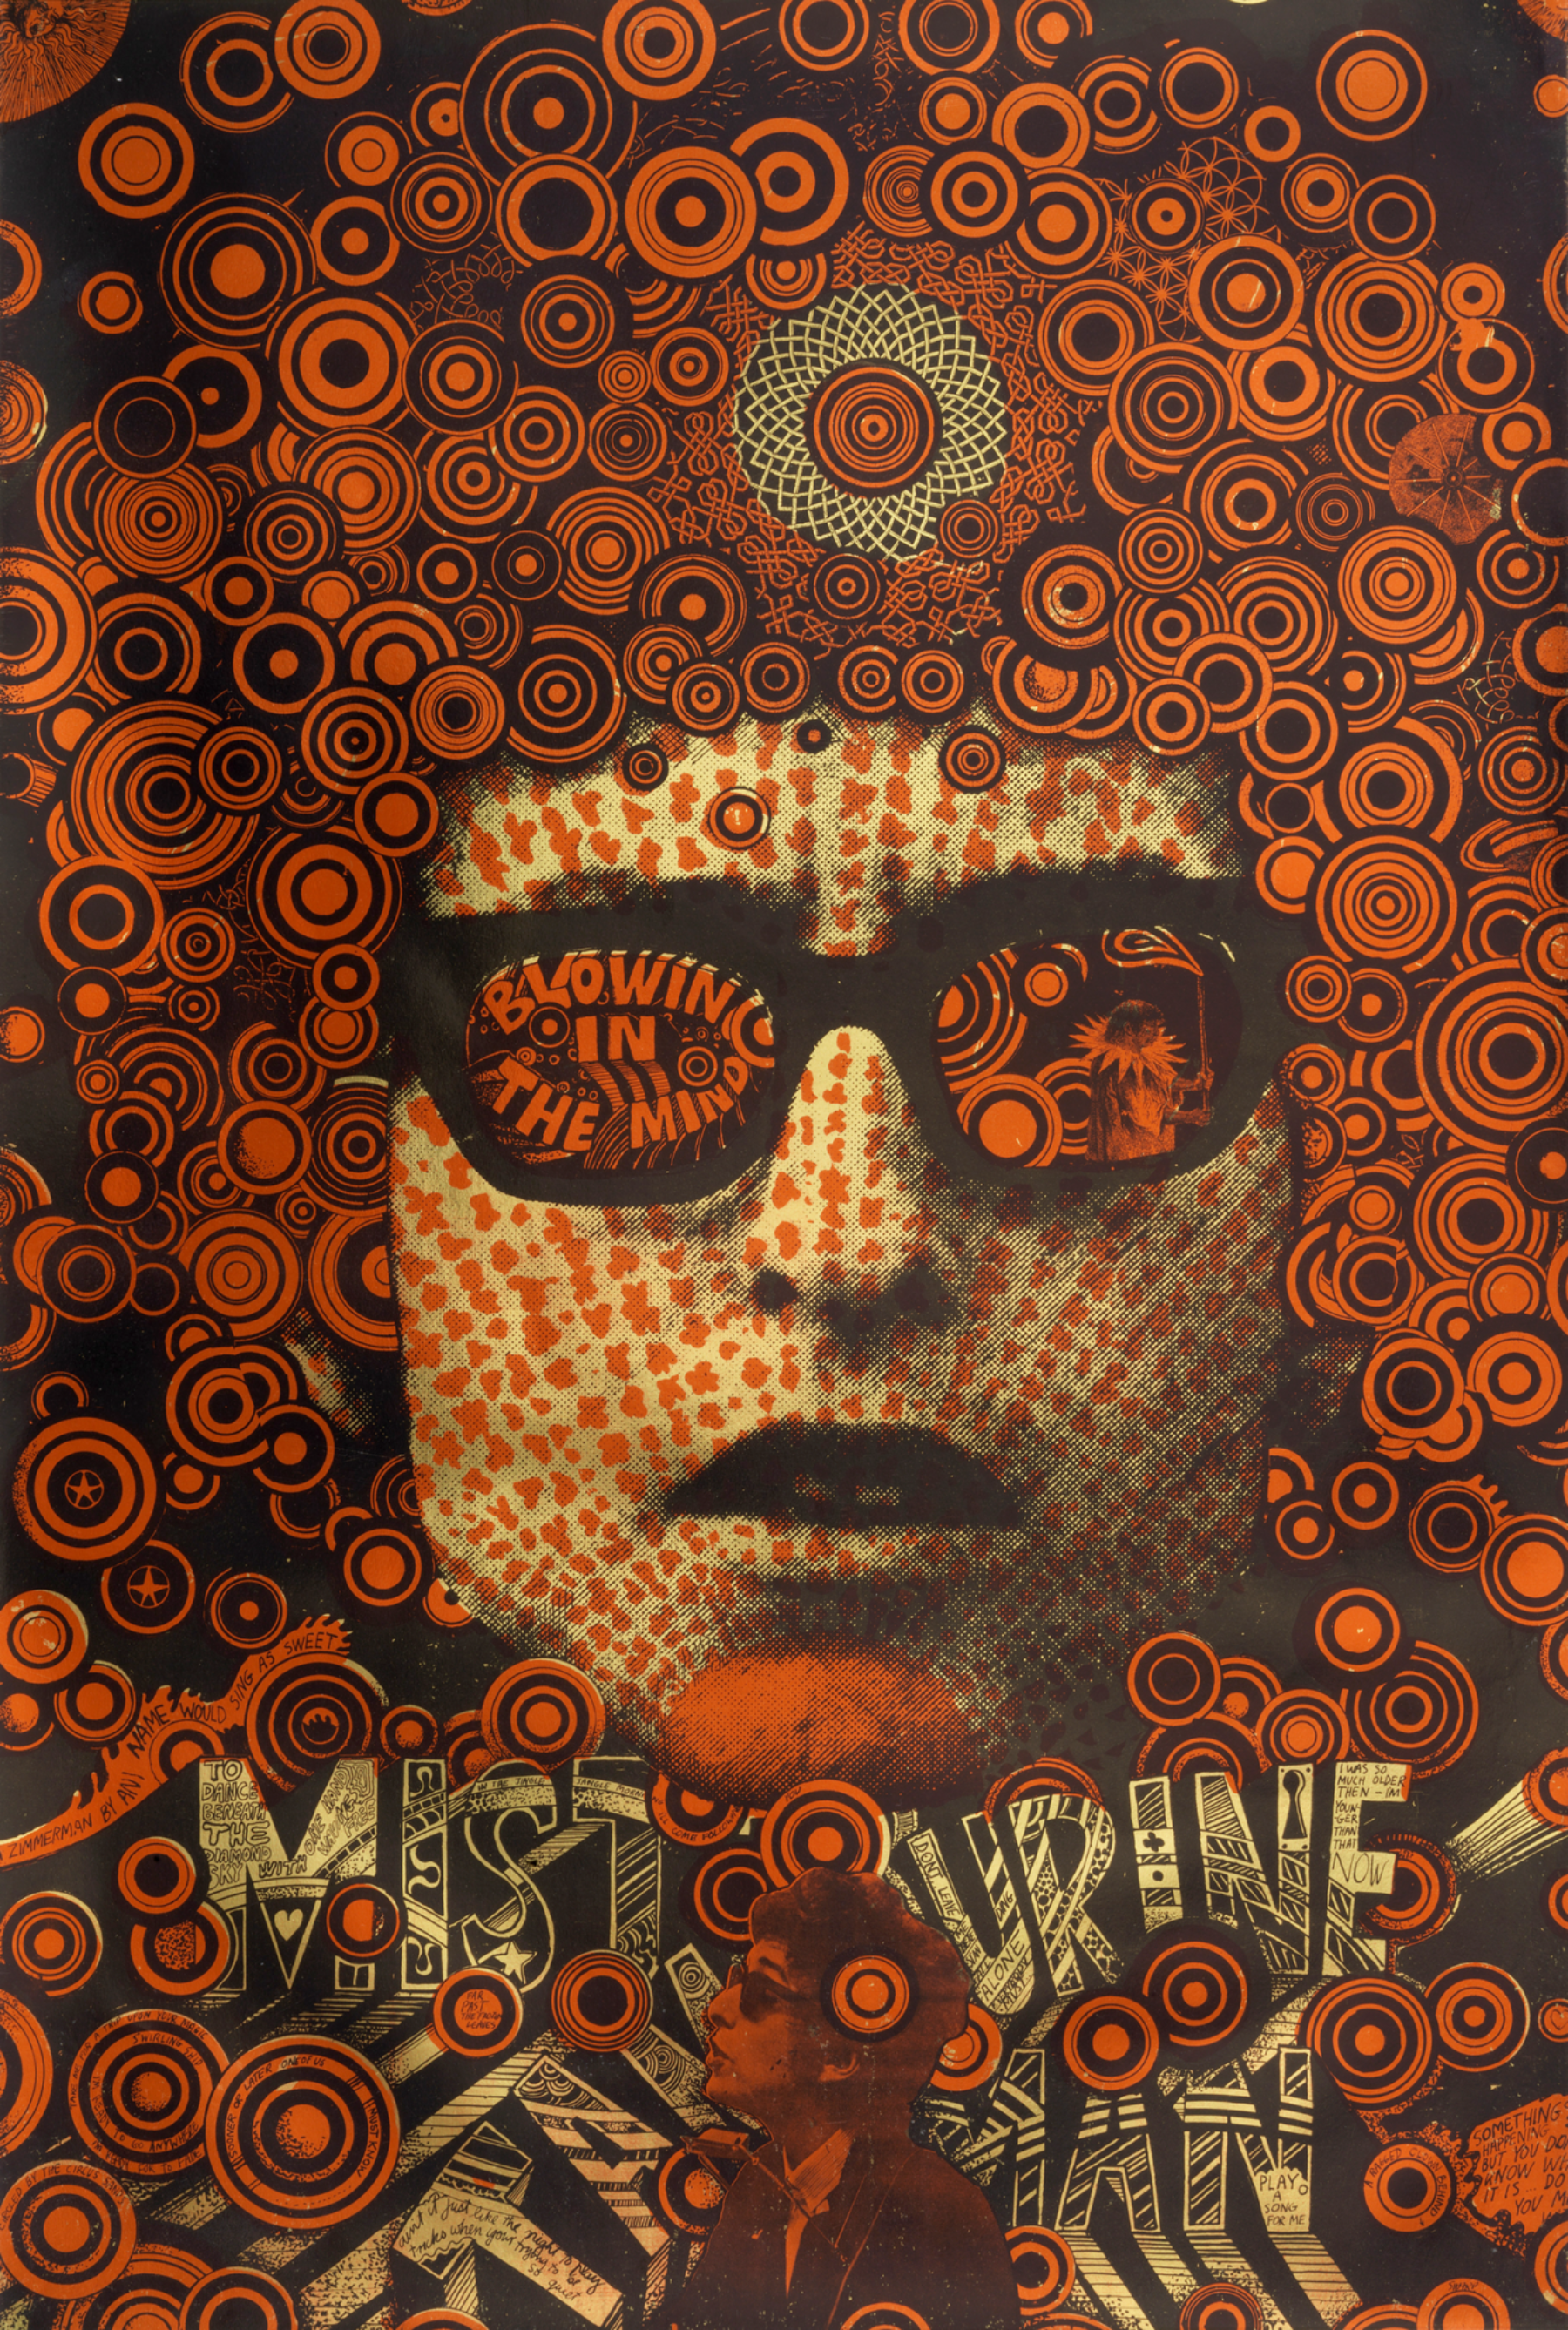 Martin Sharp, Blowing in the Mind/Mister Tambourine Man, 1968. Lithograph on wove paper, 29 7/16 x 19 7/8 inches (74.8 x 50.5 cm). Gift of Sara and Marc Benda. Cooper Hewitt, Smithsonian Design Museum, Smithsonian Institution. © Copyright Agency. Licensed by Artists Rights Society (ARS), New York, 2021